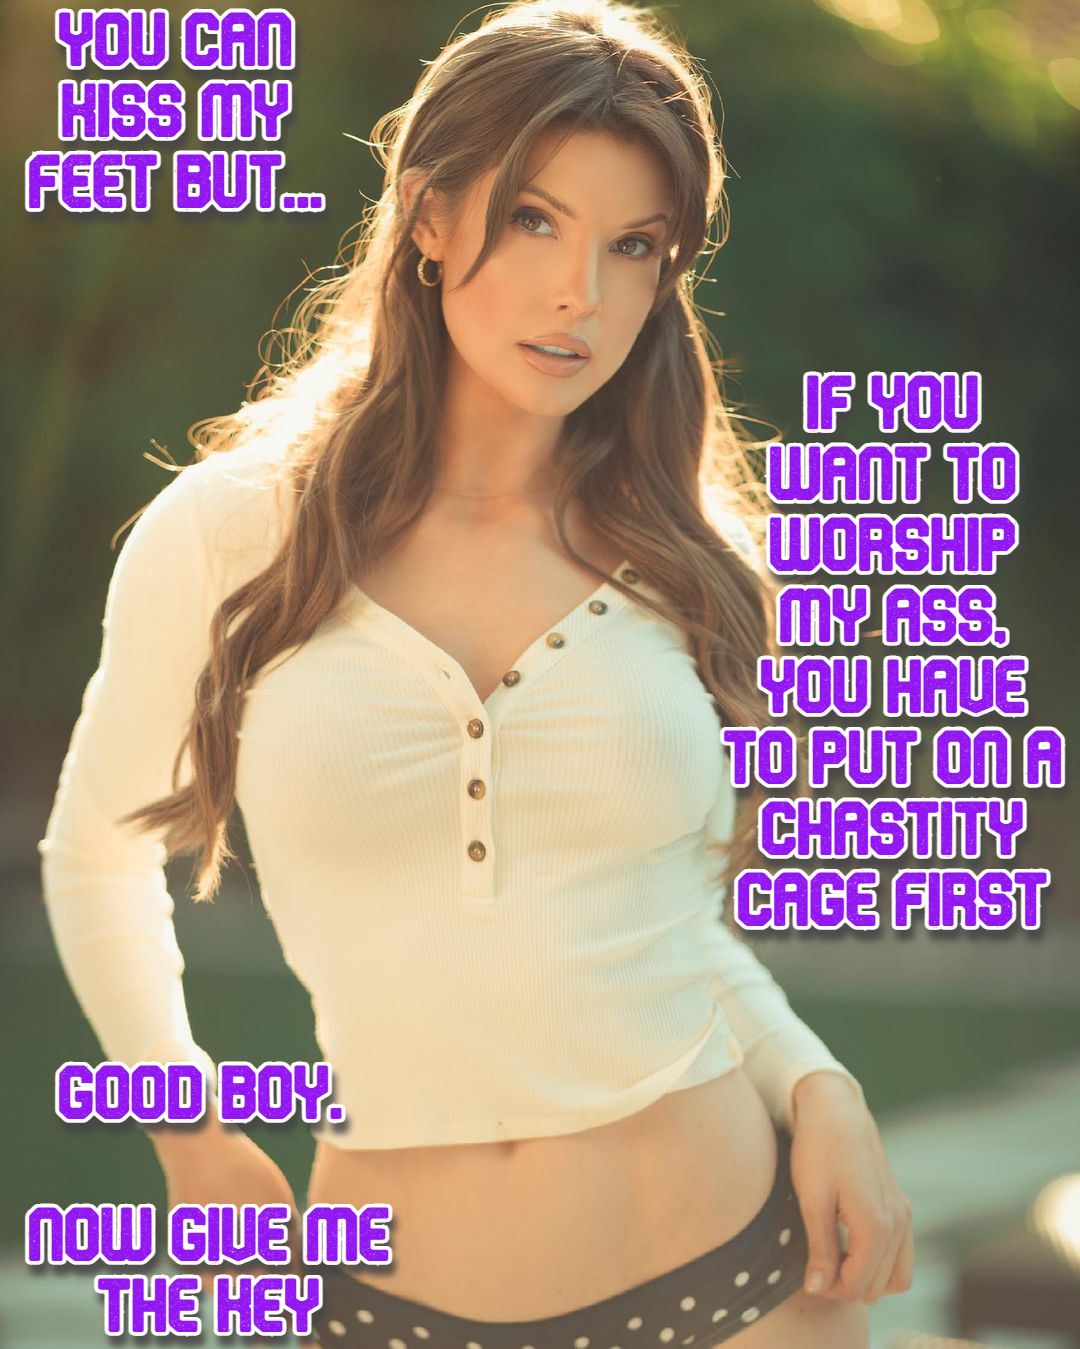 Amanda Cerny gives you an opportunity | Scrolller